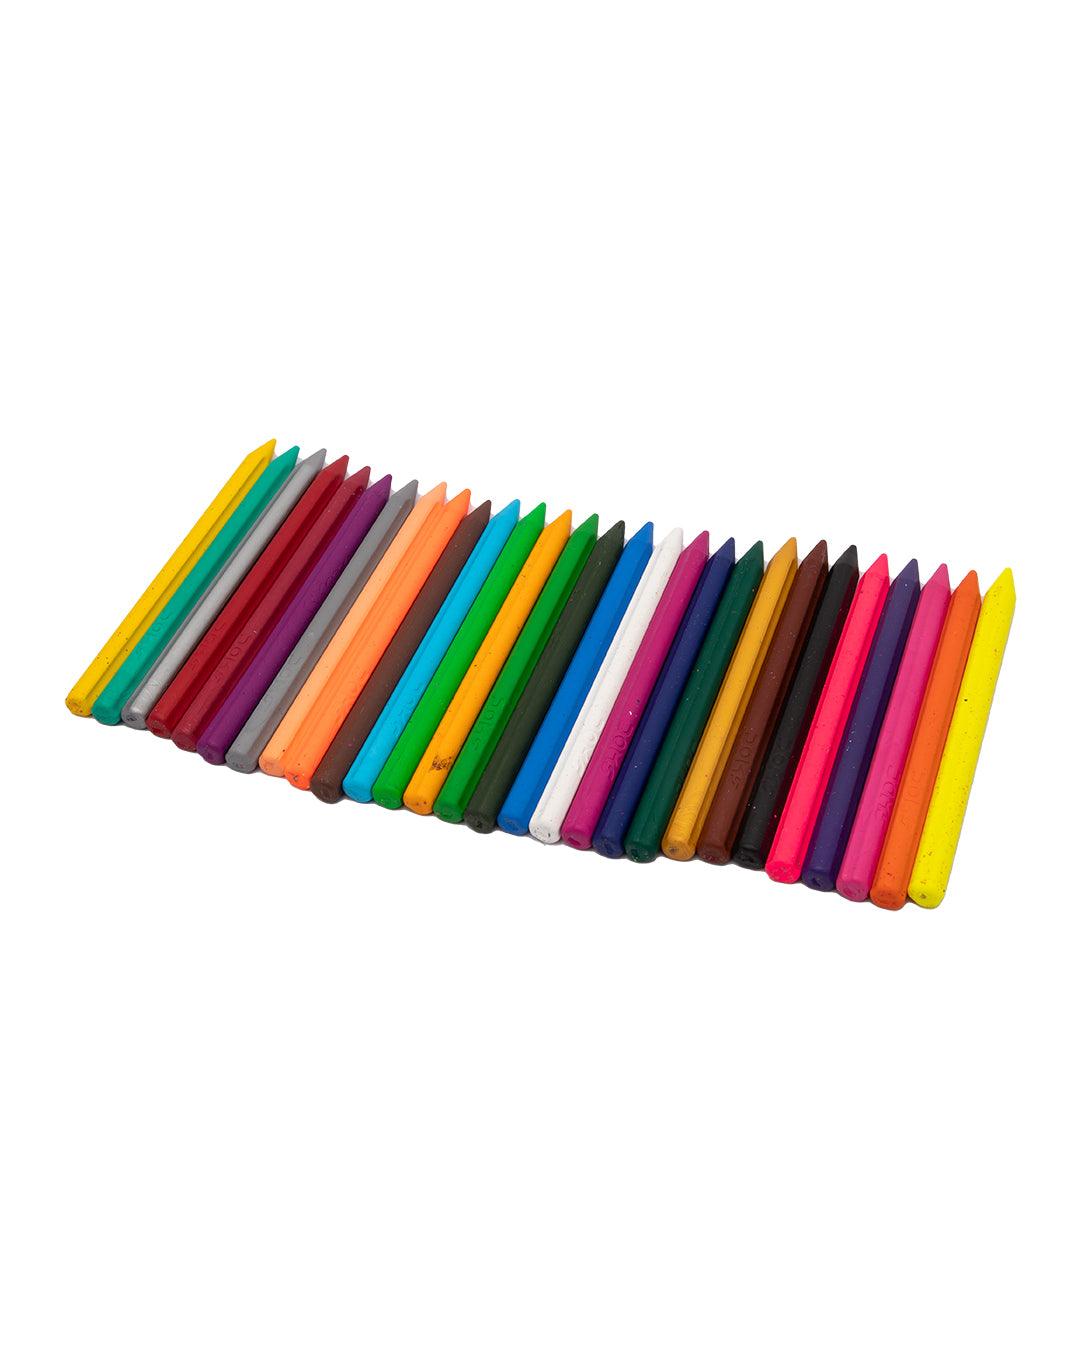 DOMS Plastic Crayons, Assorted Colours, Wax, Set of 28 Shades - MARKET 99